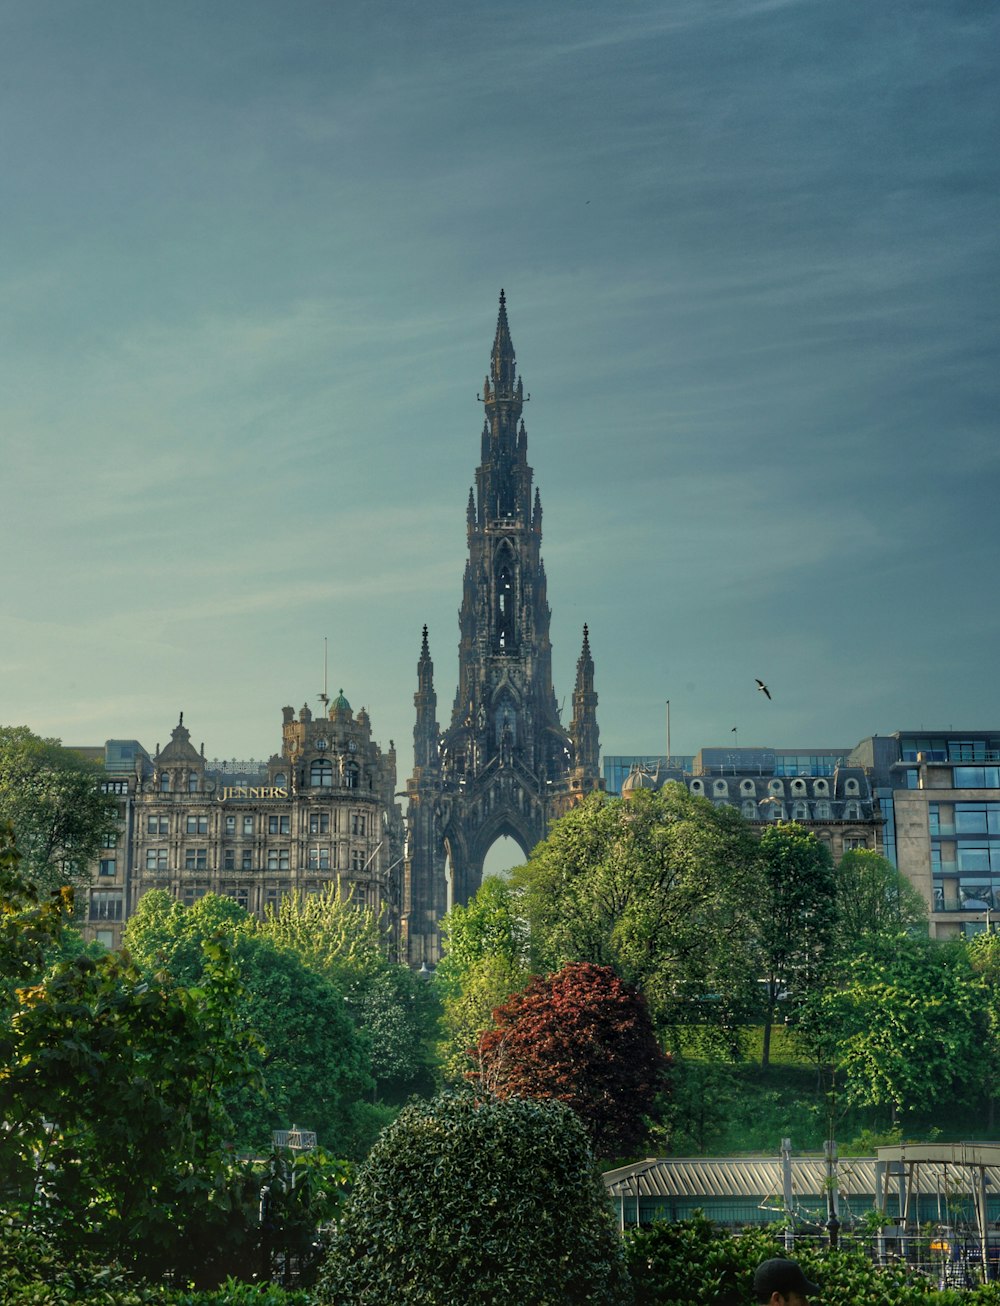 a large cathedral towering over a lush green park